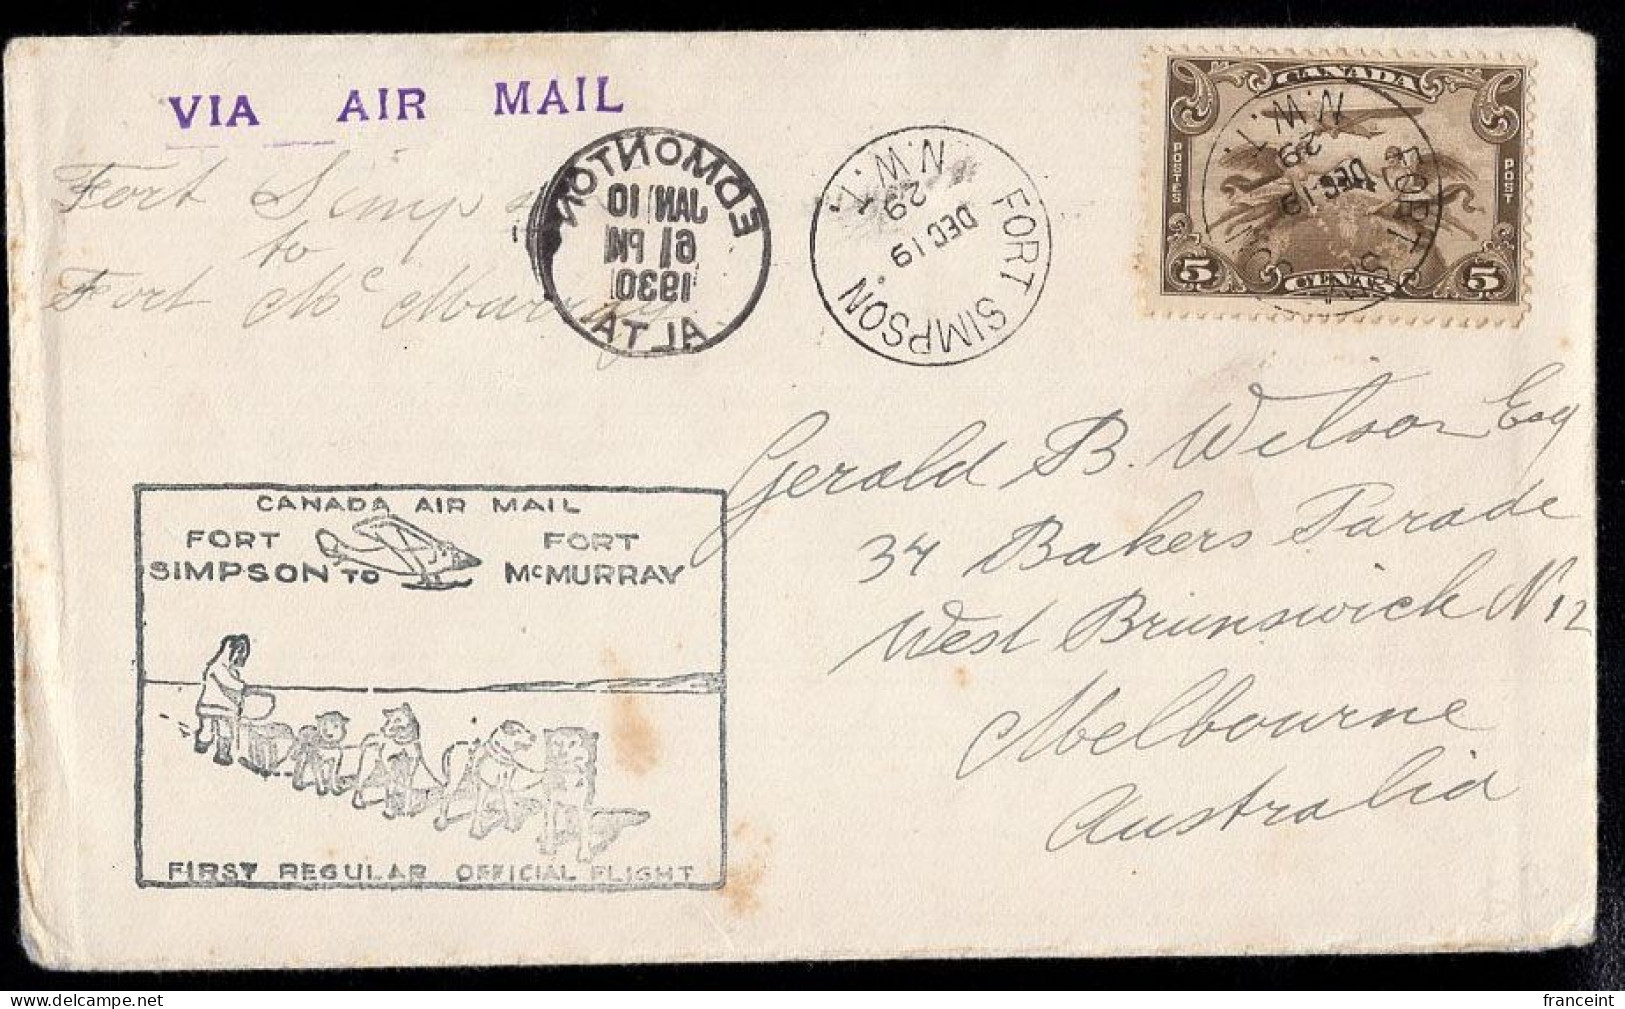 CANADA(1929) Dogsled Team. Mail Plane. First Flight Cover Fort Simpson To Fort McMurray With Delightful Cachet, Franked - First Flight Covers